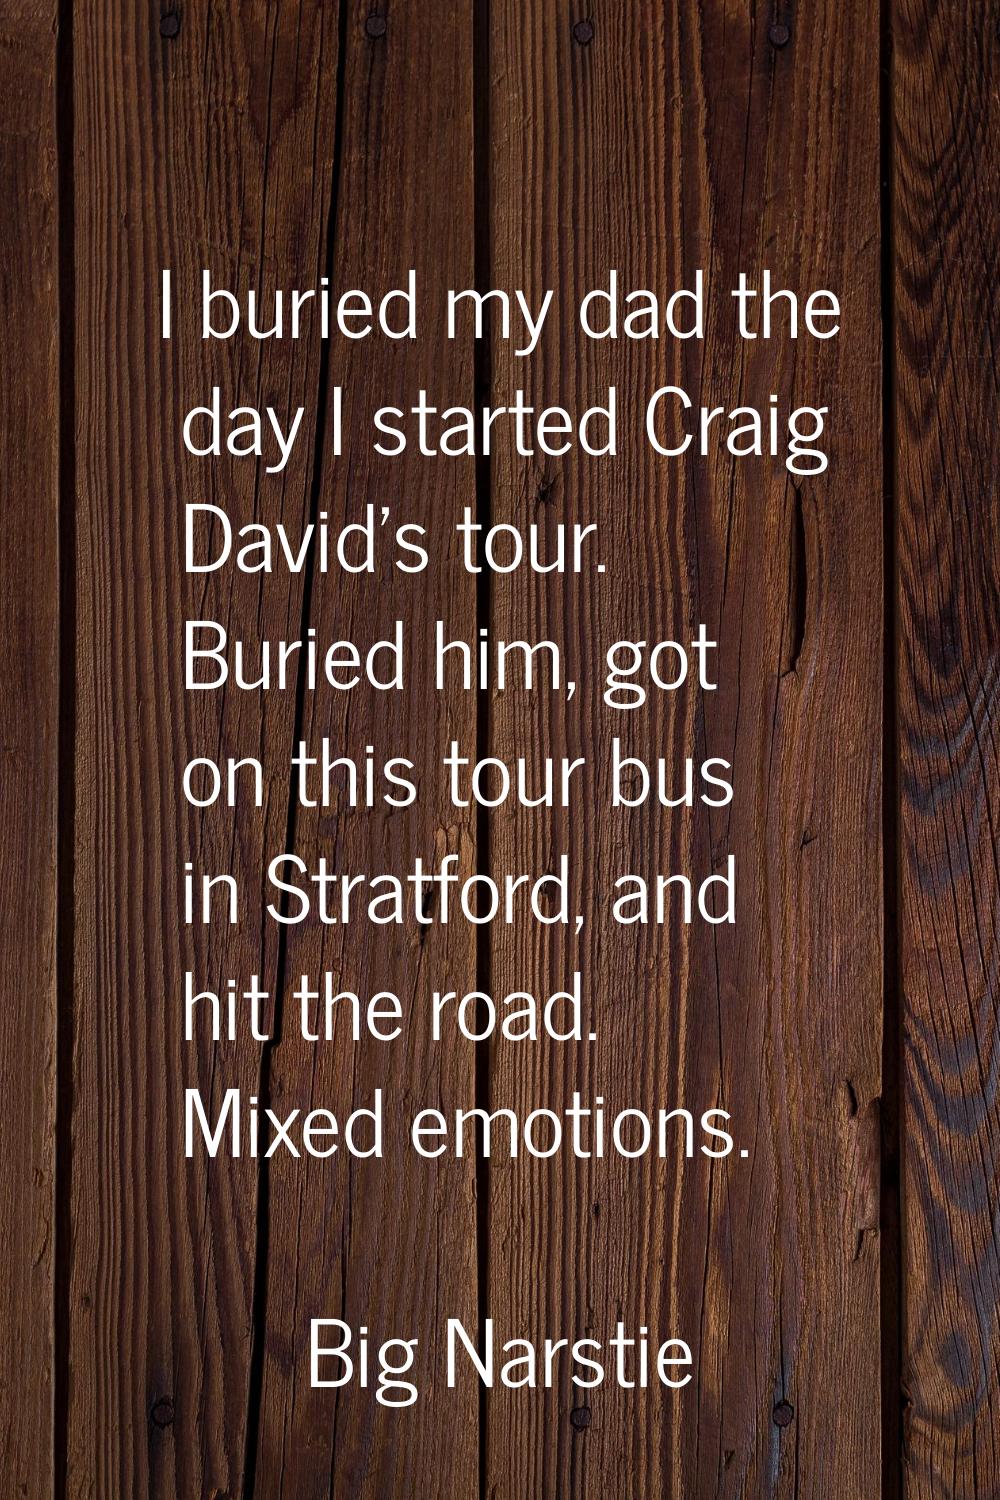 I buried my dad the day I started Craig David's tour. Buried him, got on this tour bus in Stratford